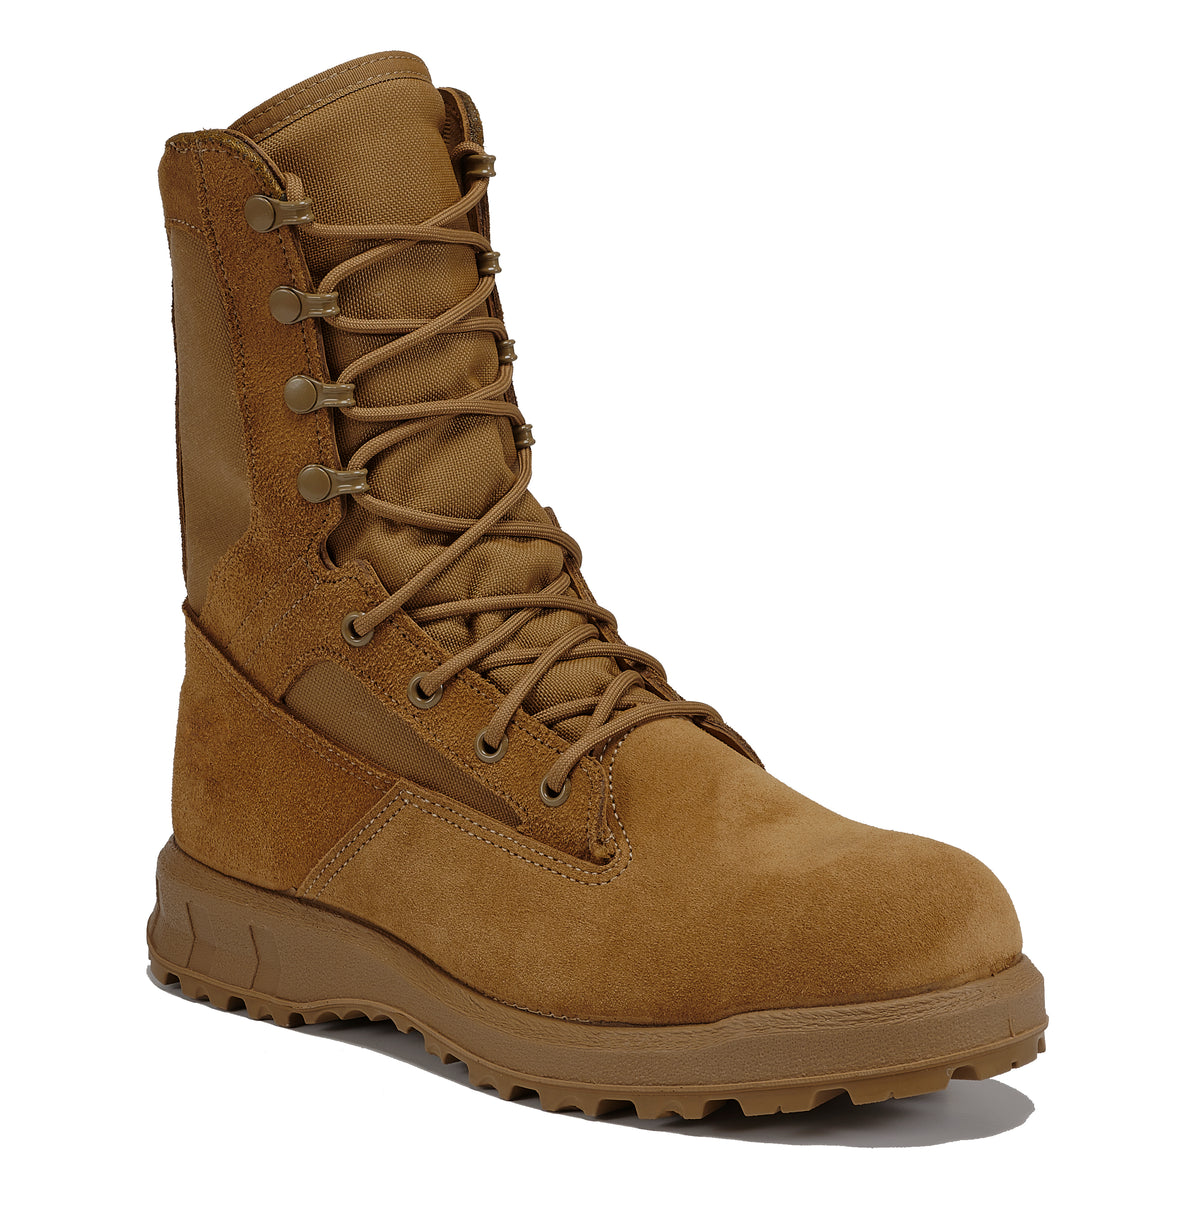 Belleville Ultralight Combat & Training Boot - C290 Coyote Military Boots